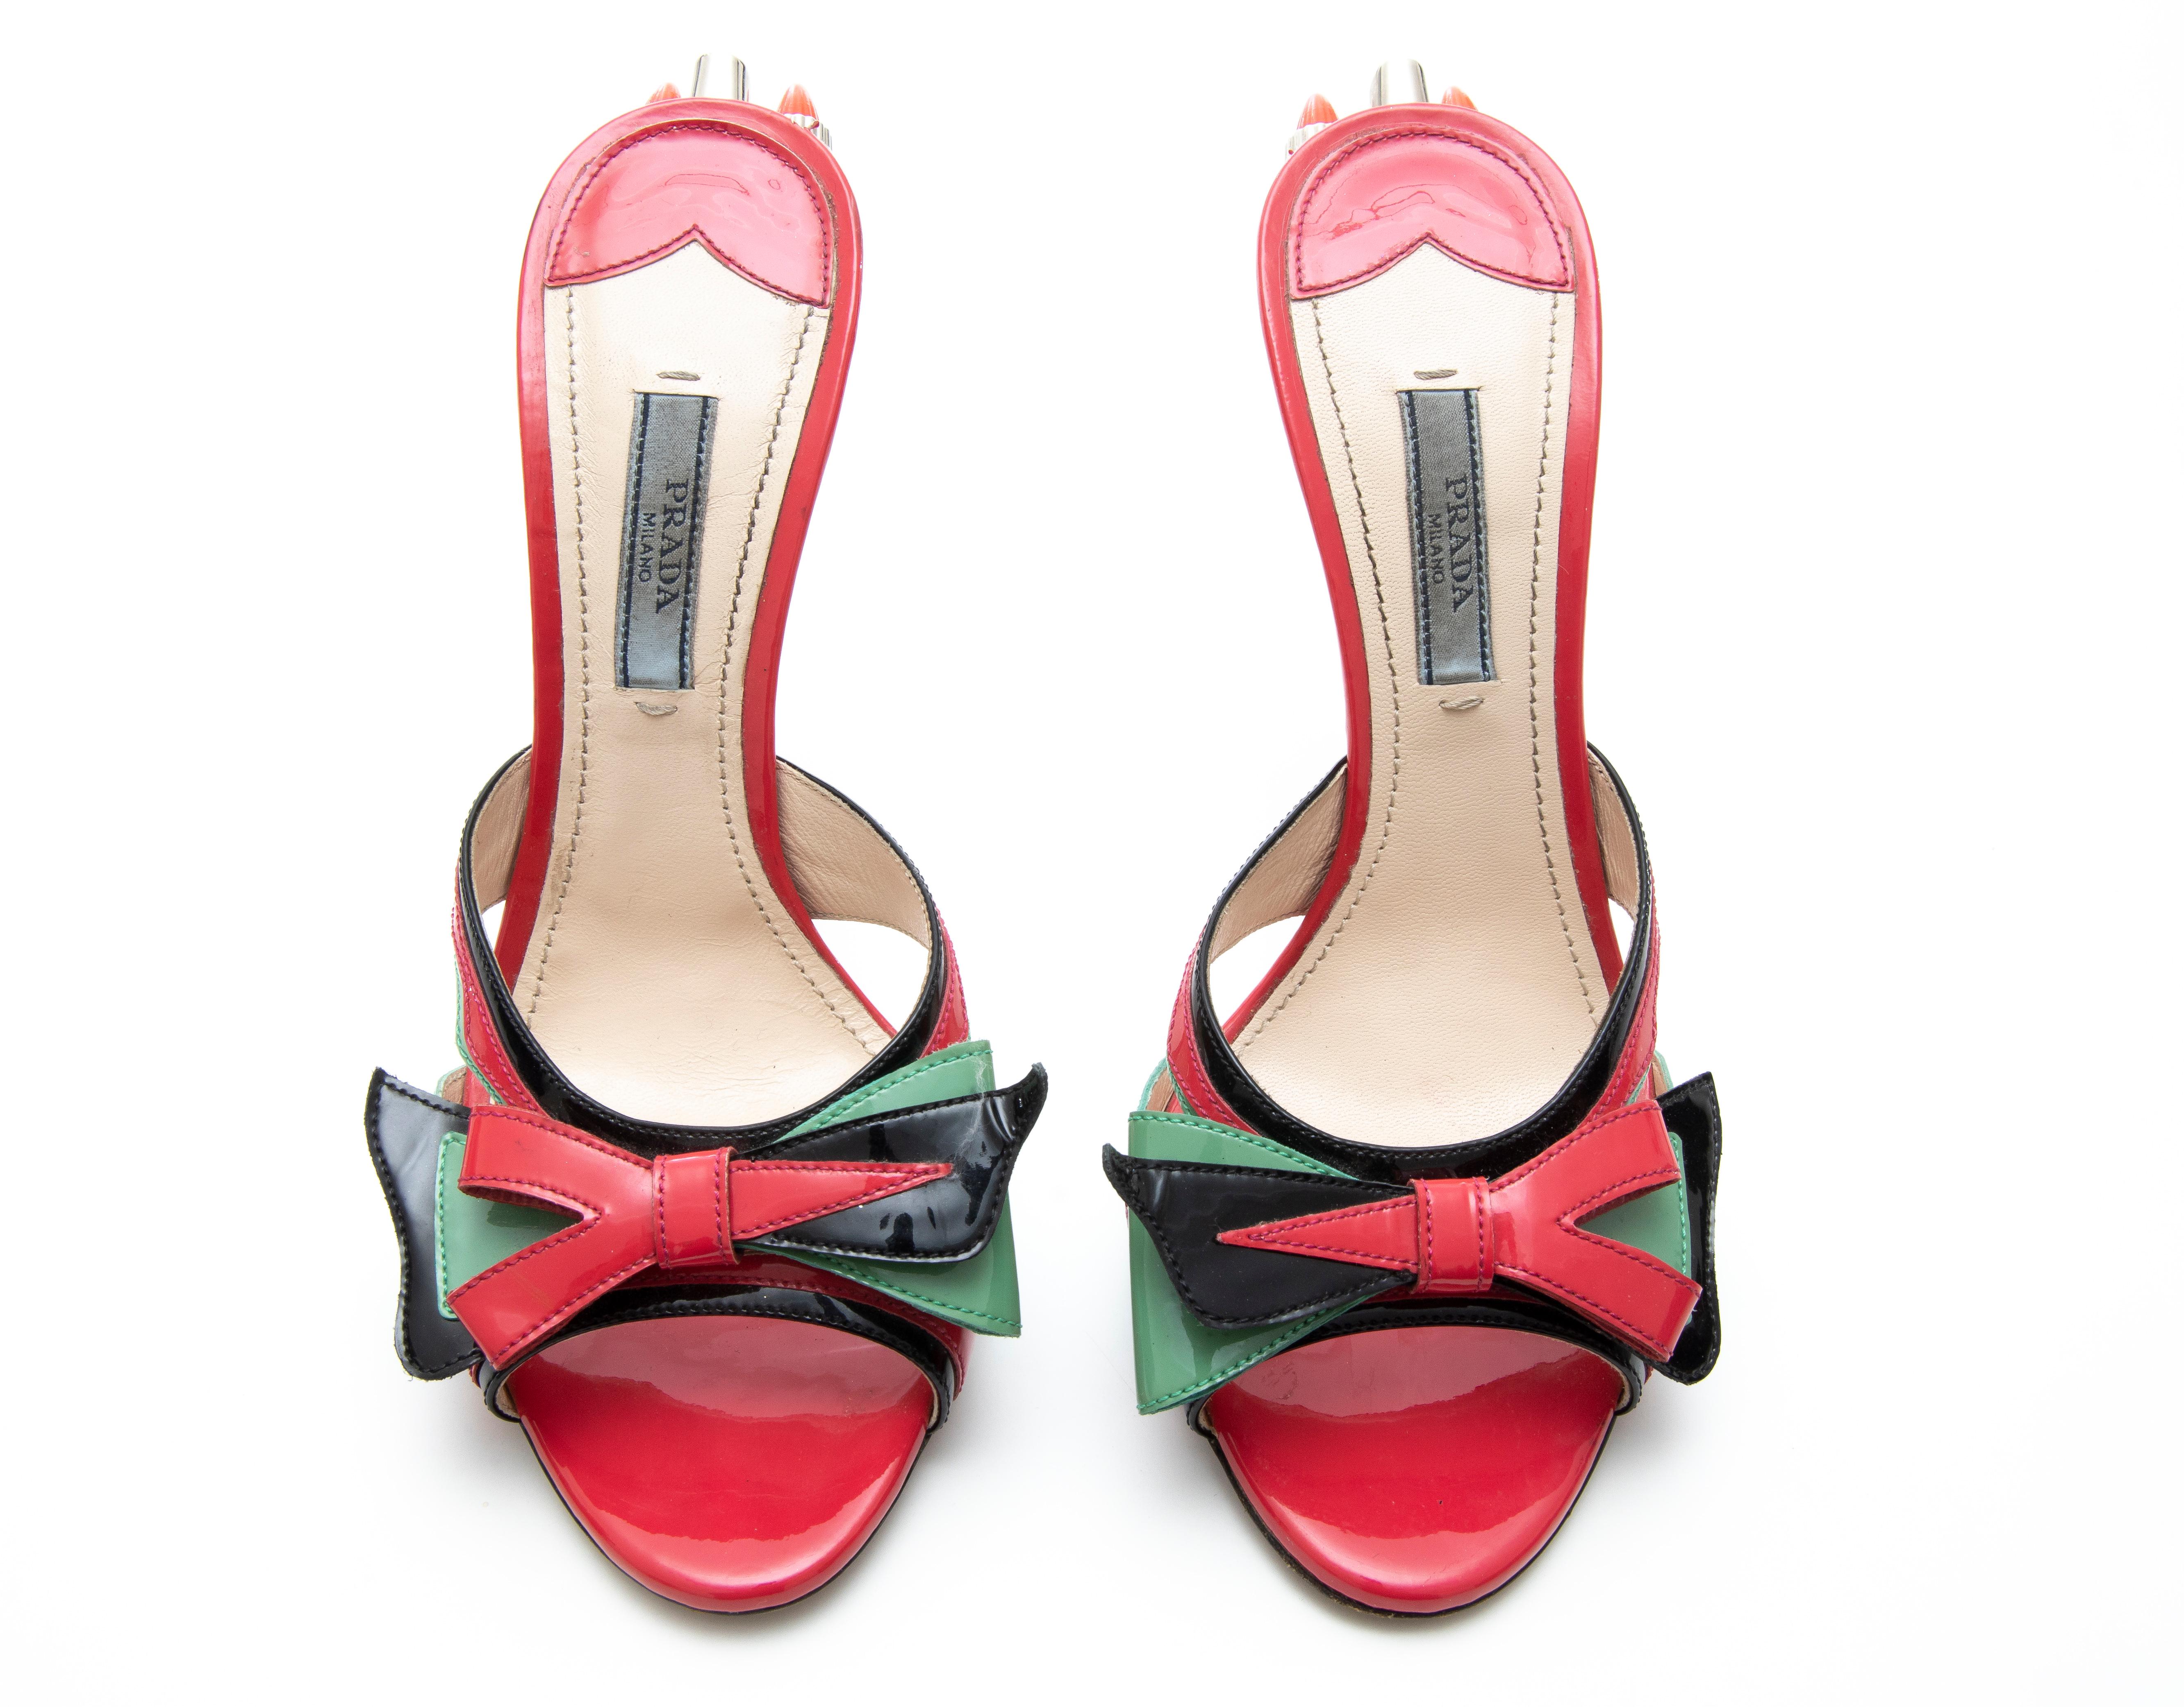 Prada Runway Patent Leather Tail Light Sandal, Spring 2012 For Sale 8